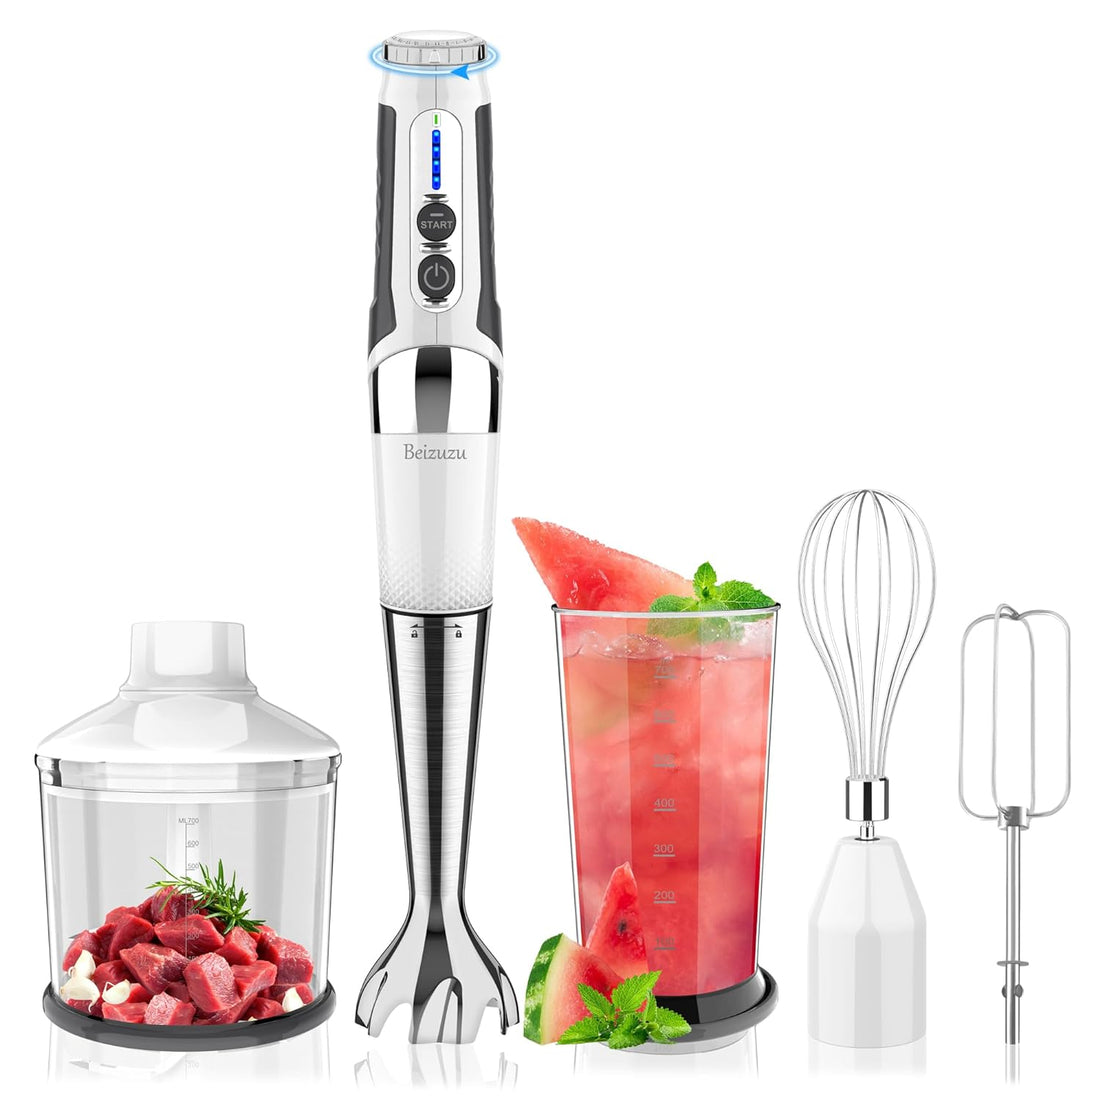 Cordless Hand Blender: 4-in-1 Rechargeable Cordless Immersion Blender Handheld, 21-Speed & 3-Angle Adjustable with Chopper, Beaker, Whisk and Beater for Milkshakes | Smoothies |Soup| Baby Food (White)